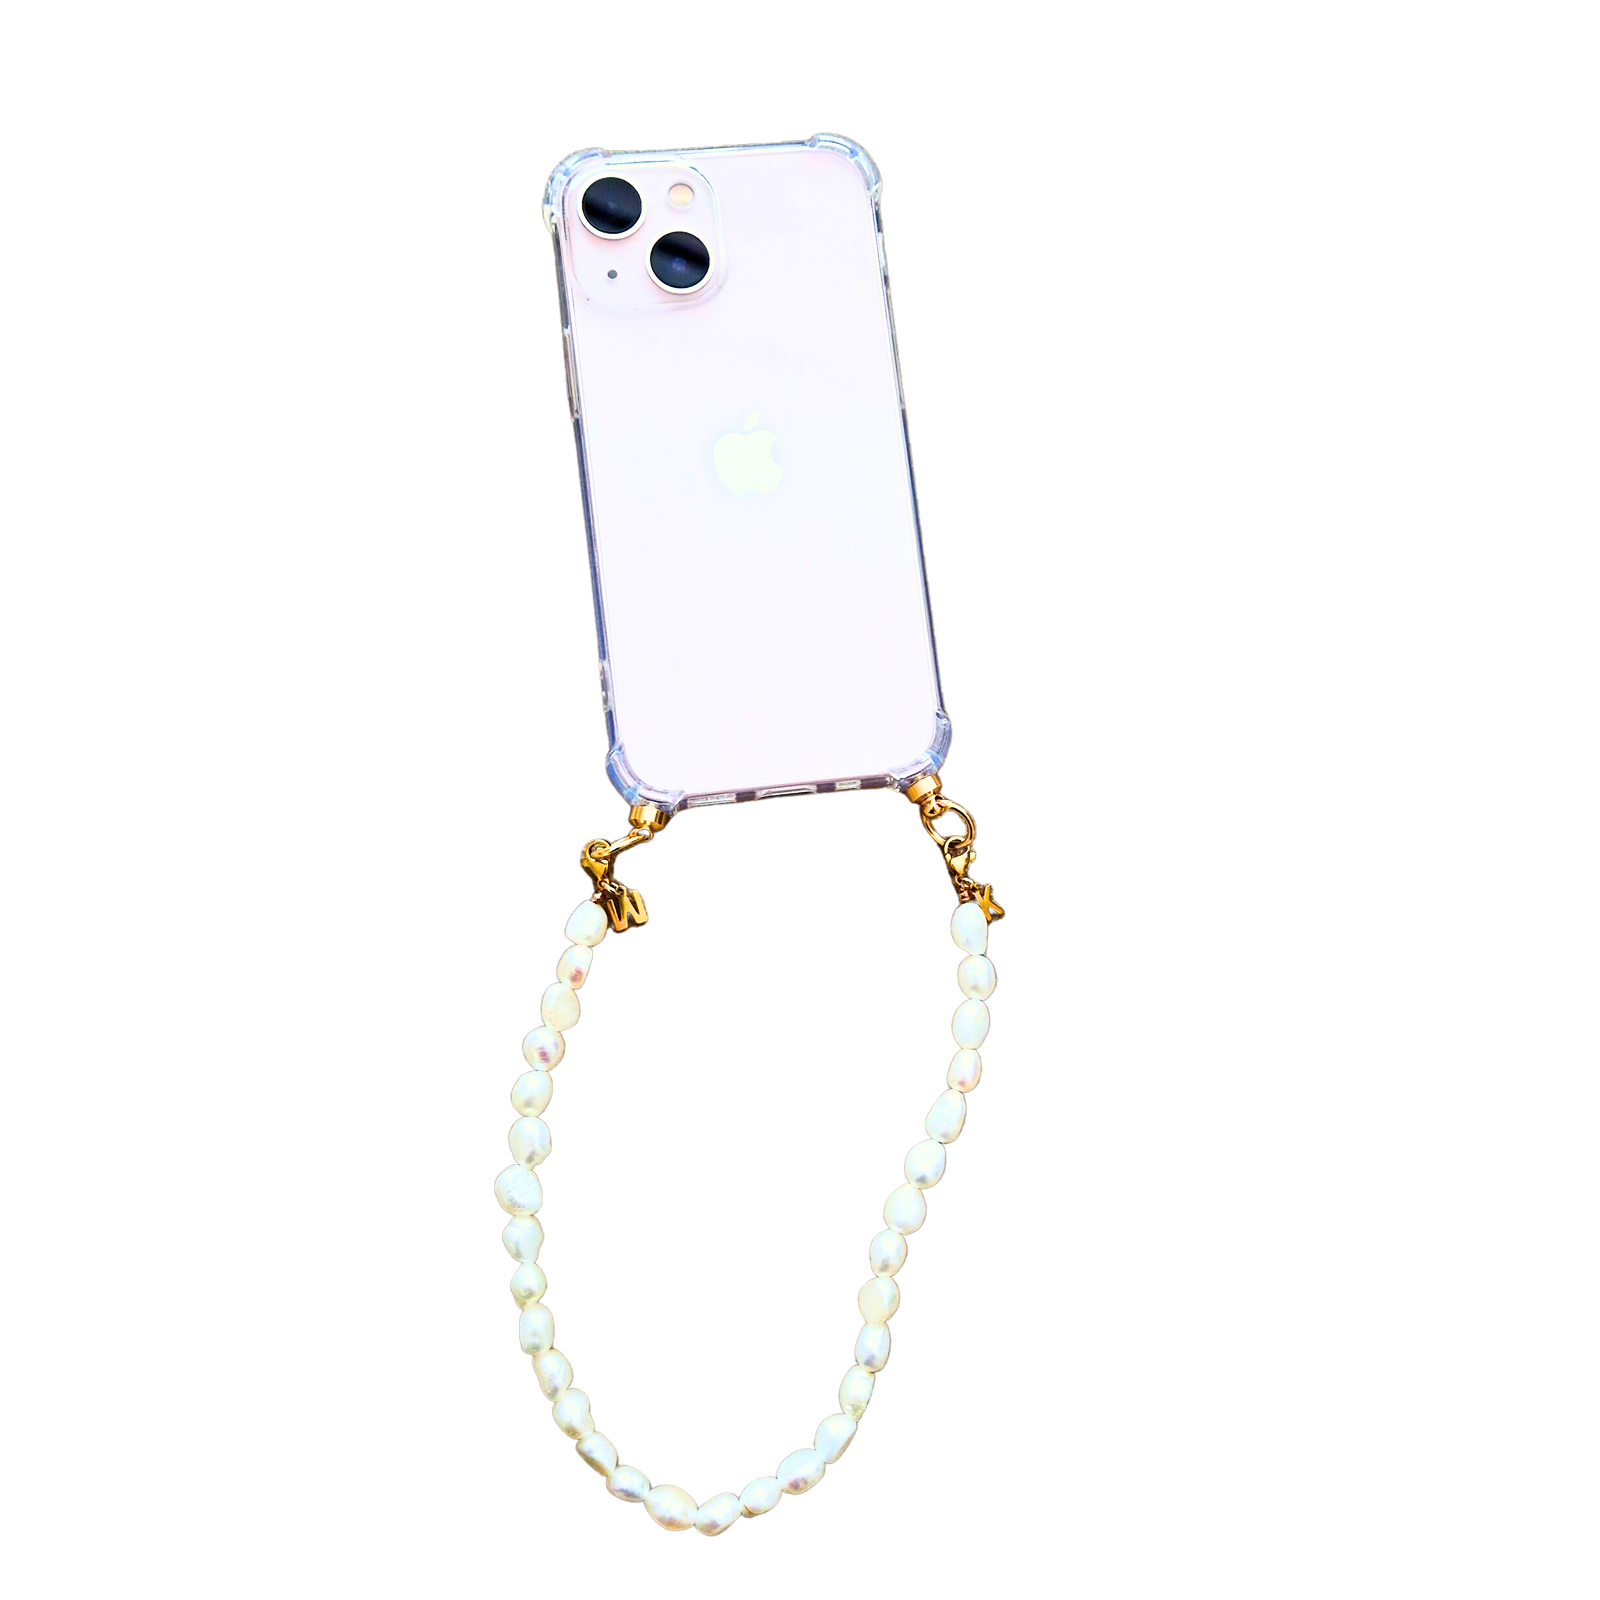 Initial Phone cord freshwater pearls with Phone Case